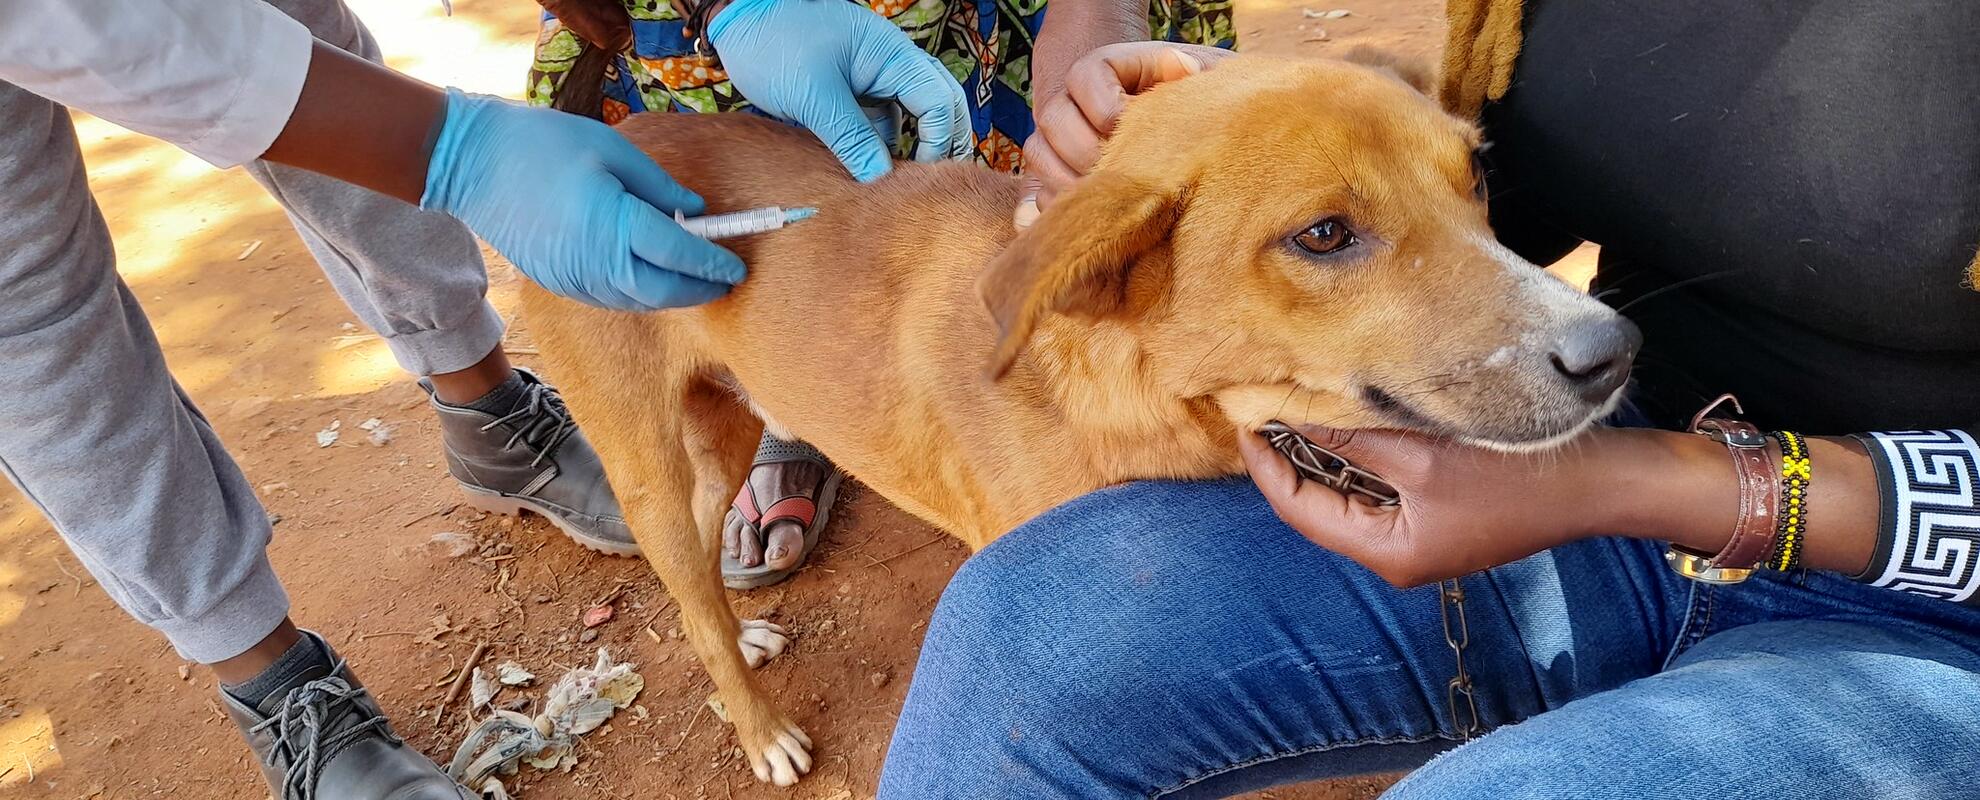 A dog being vaccinated against rabies